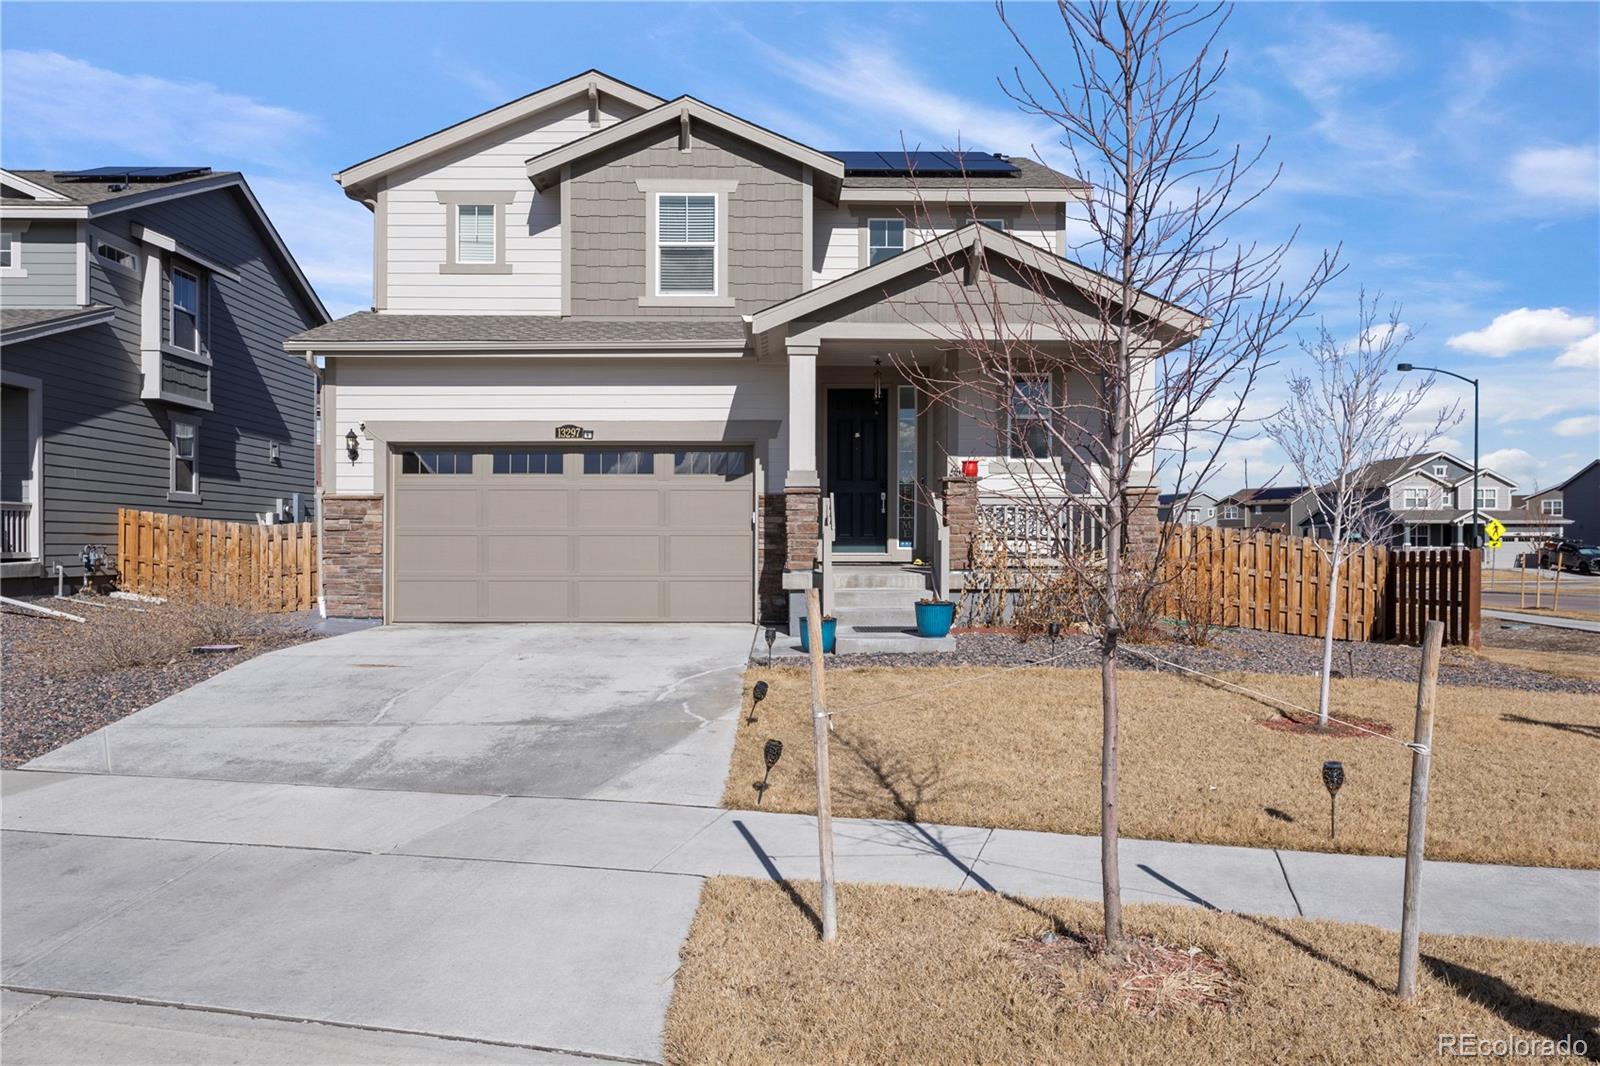 13297 E 109th Way, commerce city MLS: 8198750 Beds: 3 Baths: 3 Price: $555,000